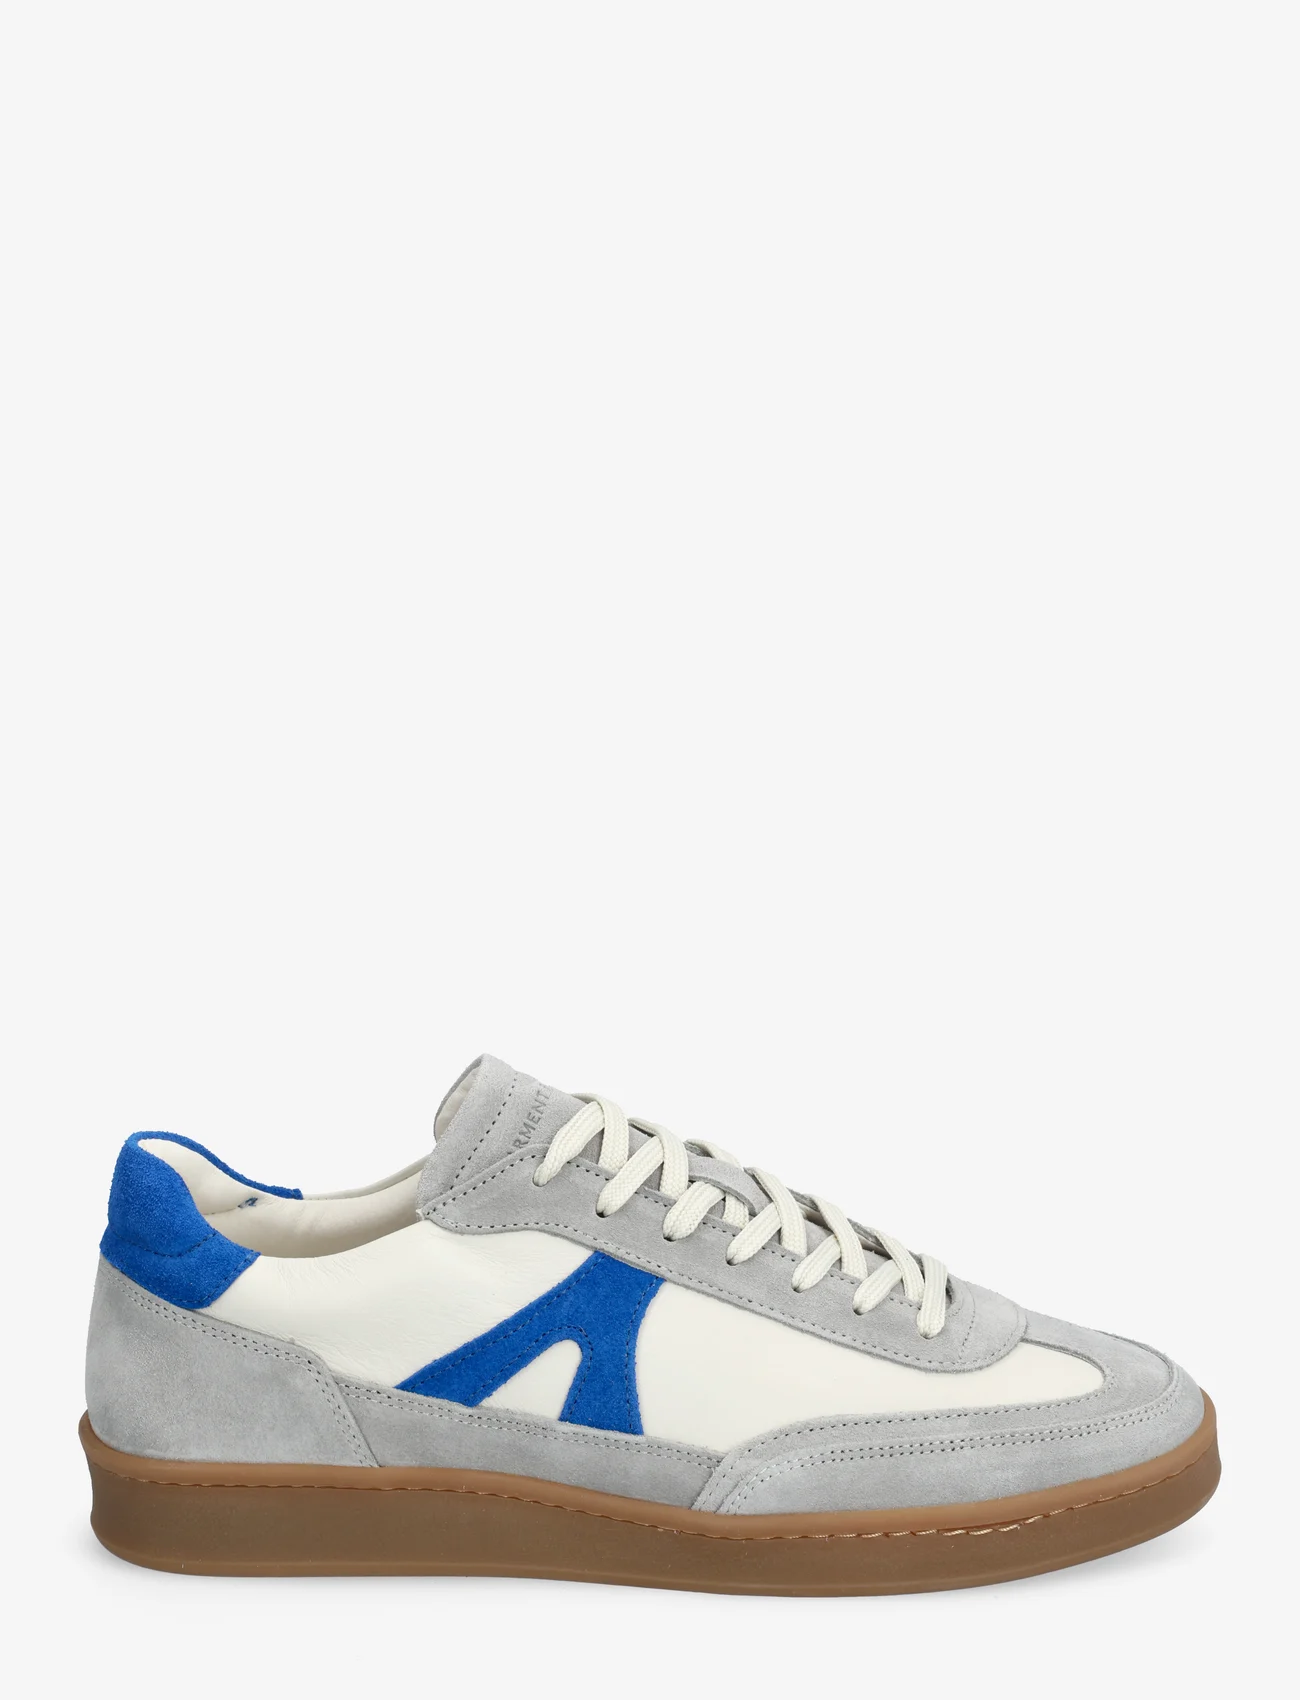 Garment Project - Liga - Off White / Blue Leather Mix - lav ankel - off white - 1